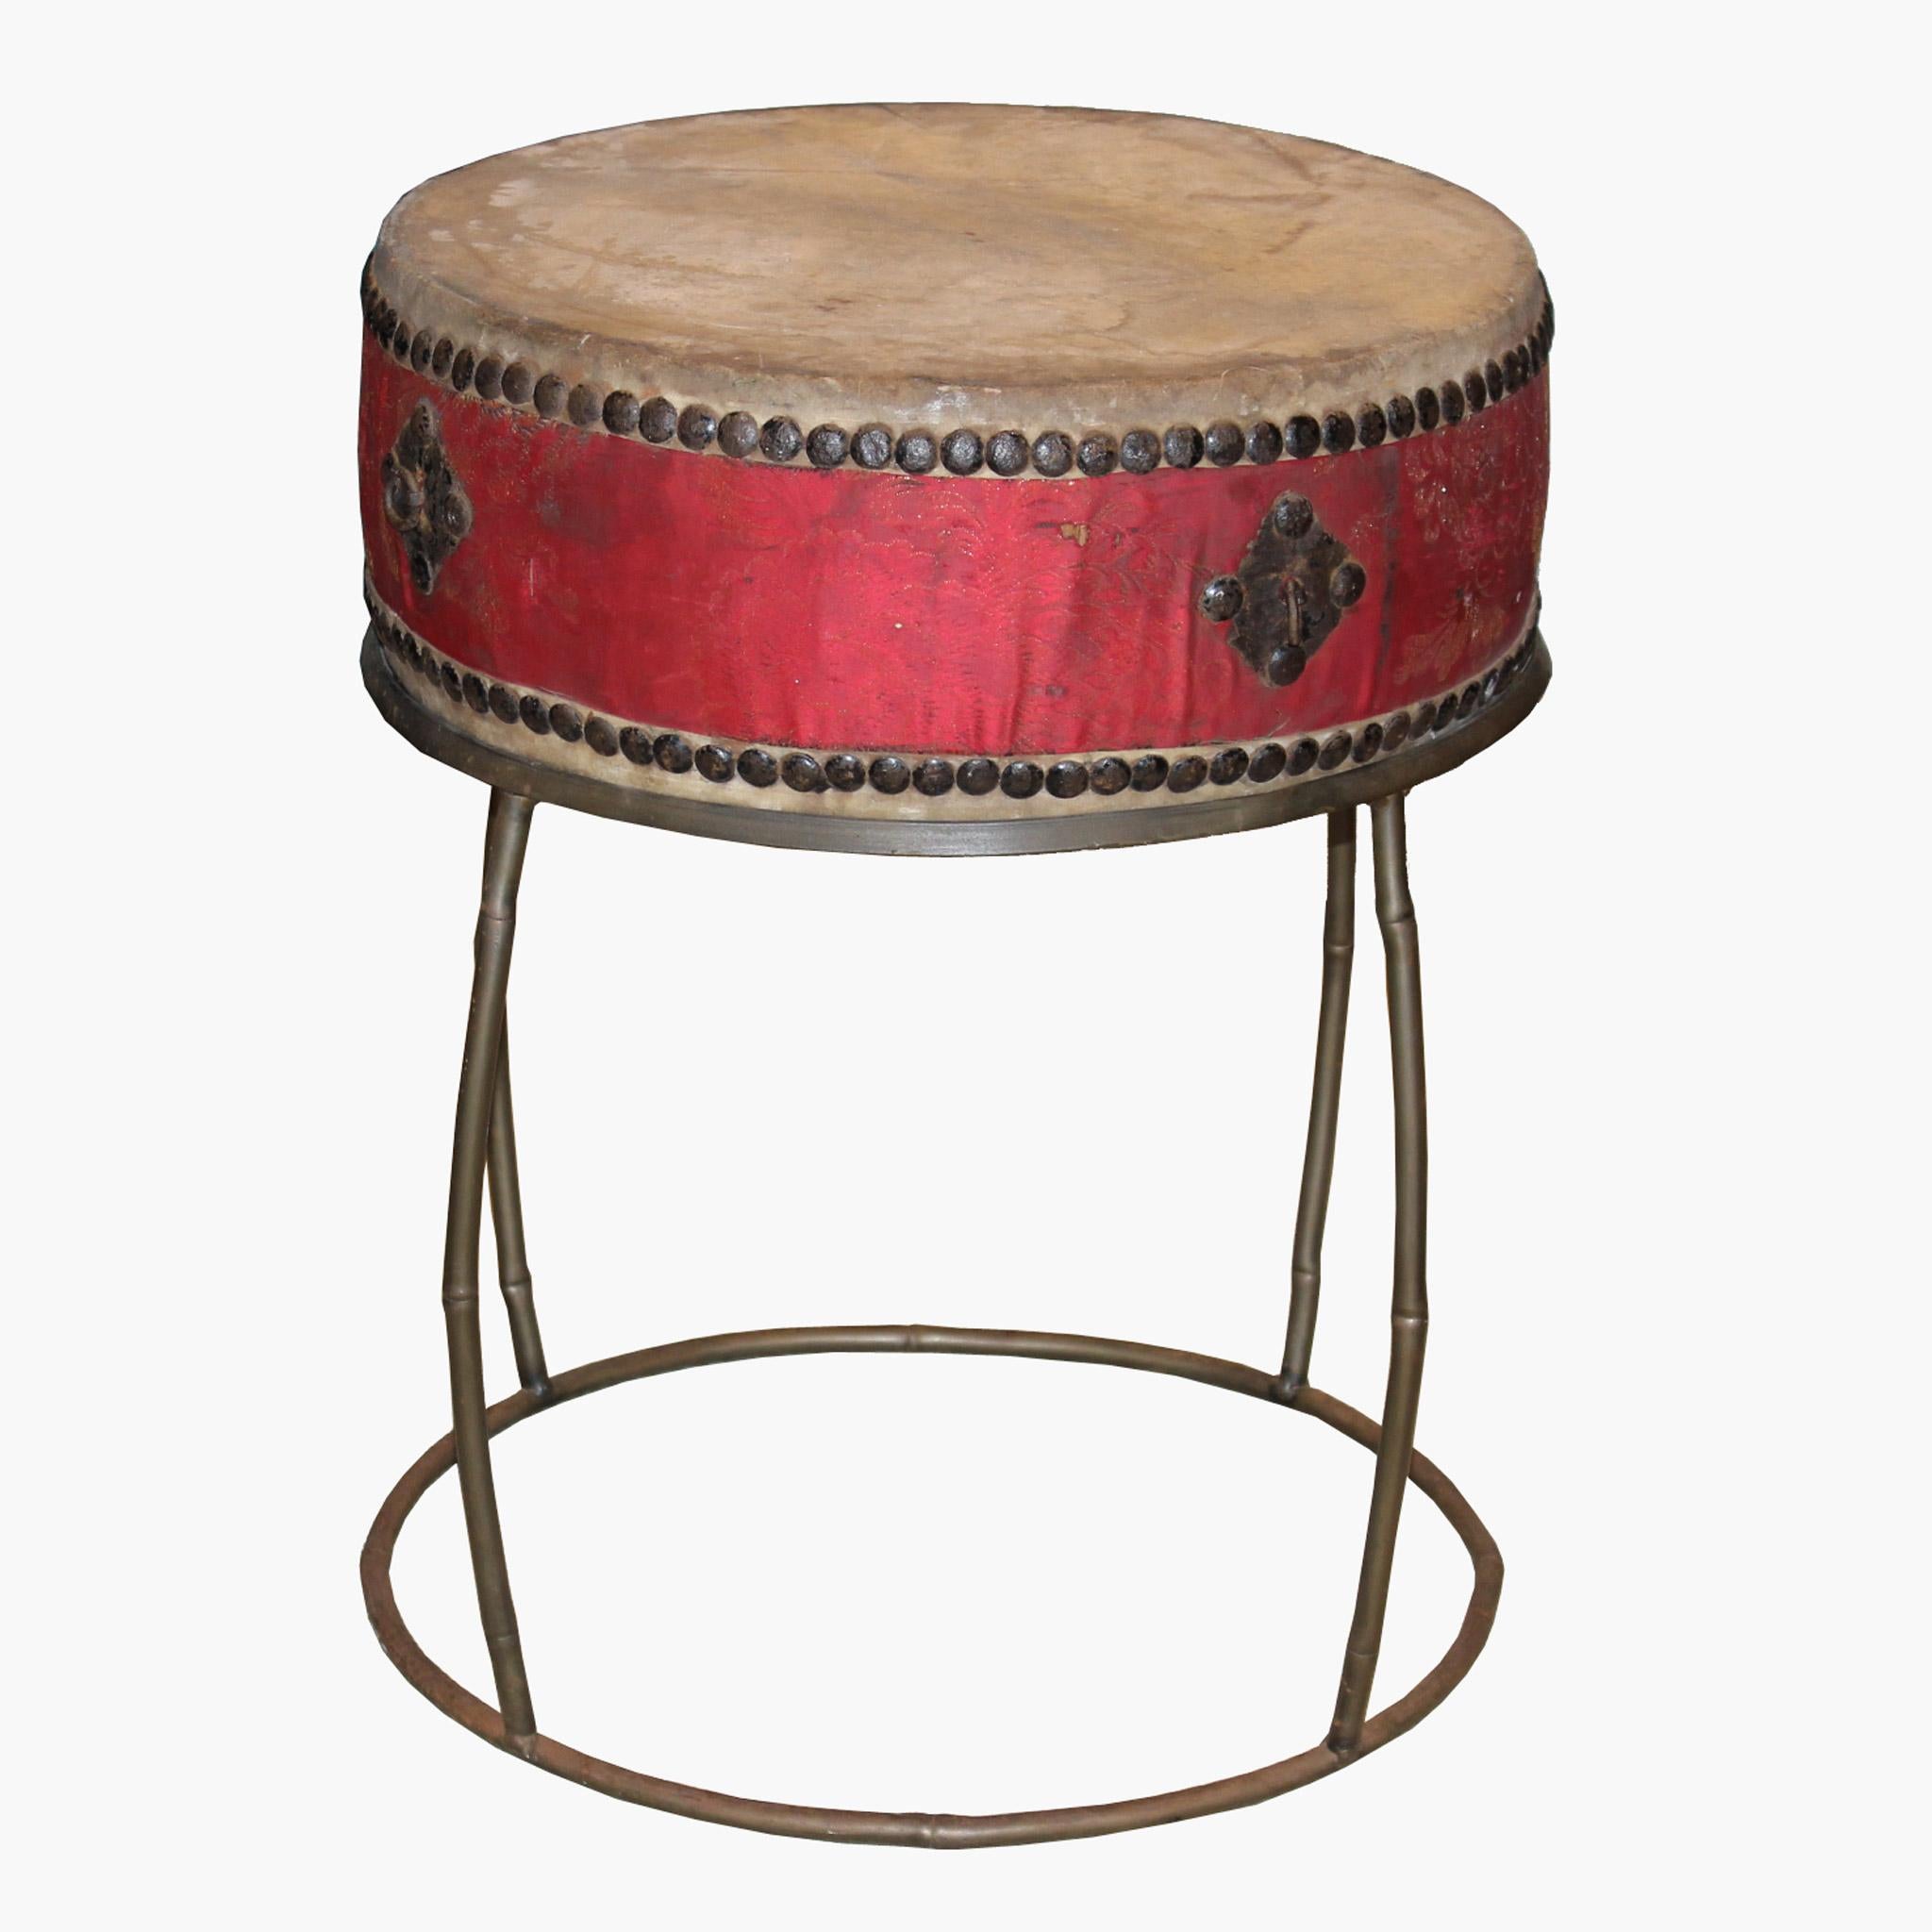 Korean shaman's drum on a custom iron bamboo motif stand. Originally used by a shaman in Korean villages during ceremonial events. Wrapped in red silk fabric.